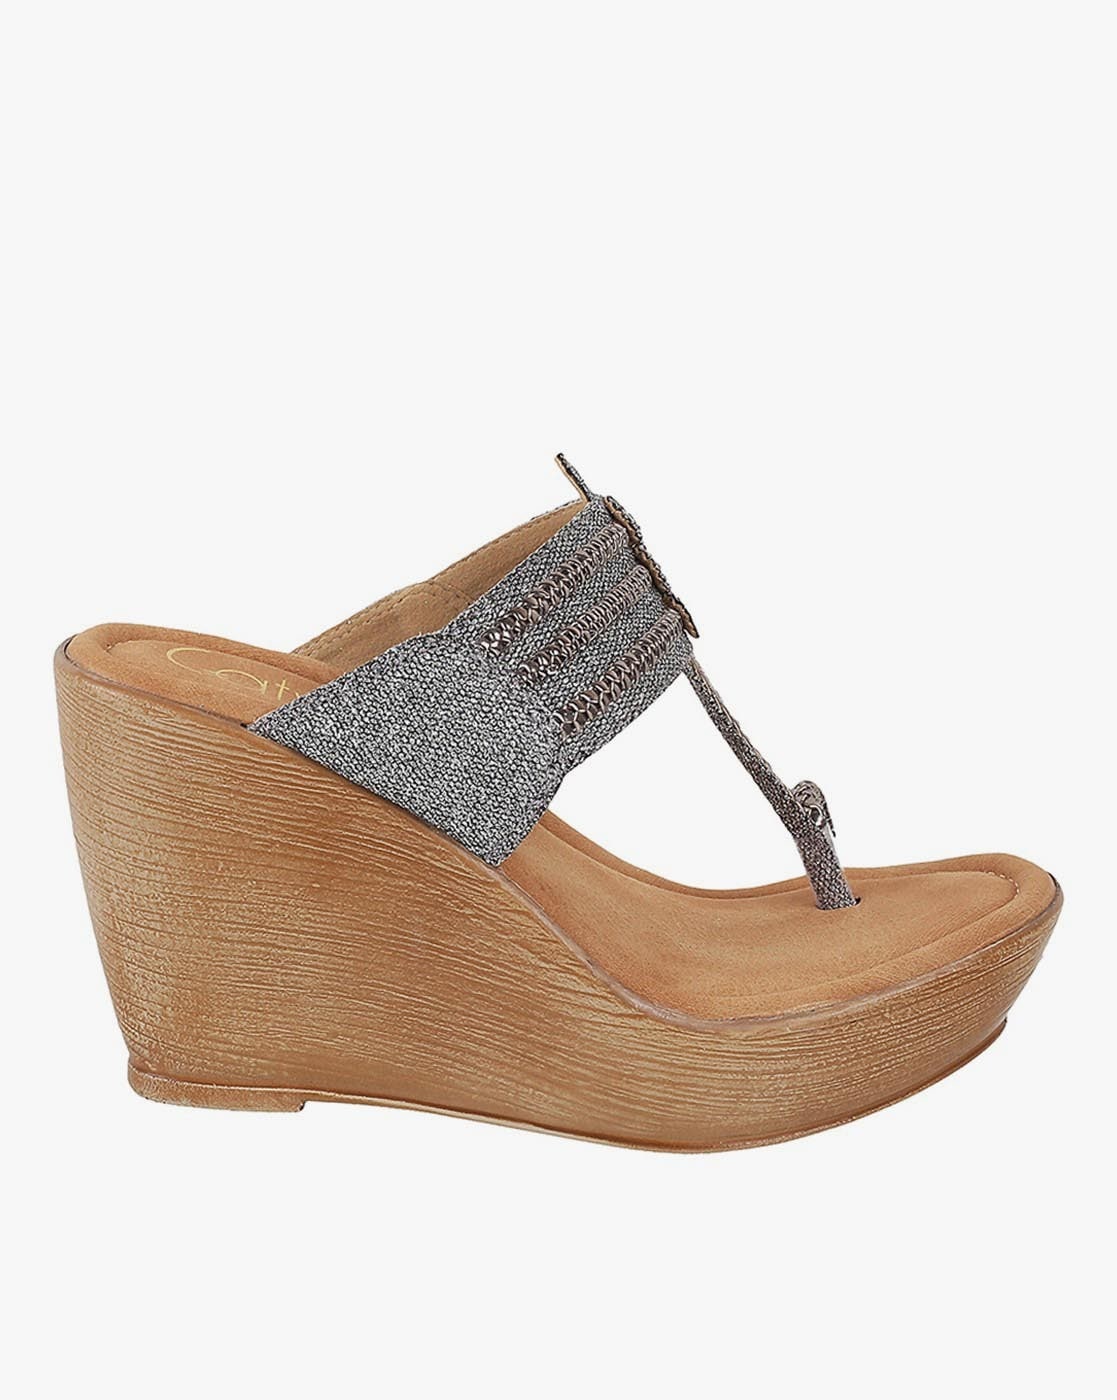 21 Wedge Sandals For Women On Amazon Under $50